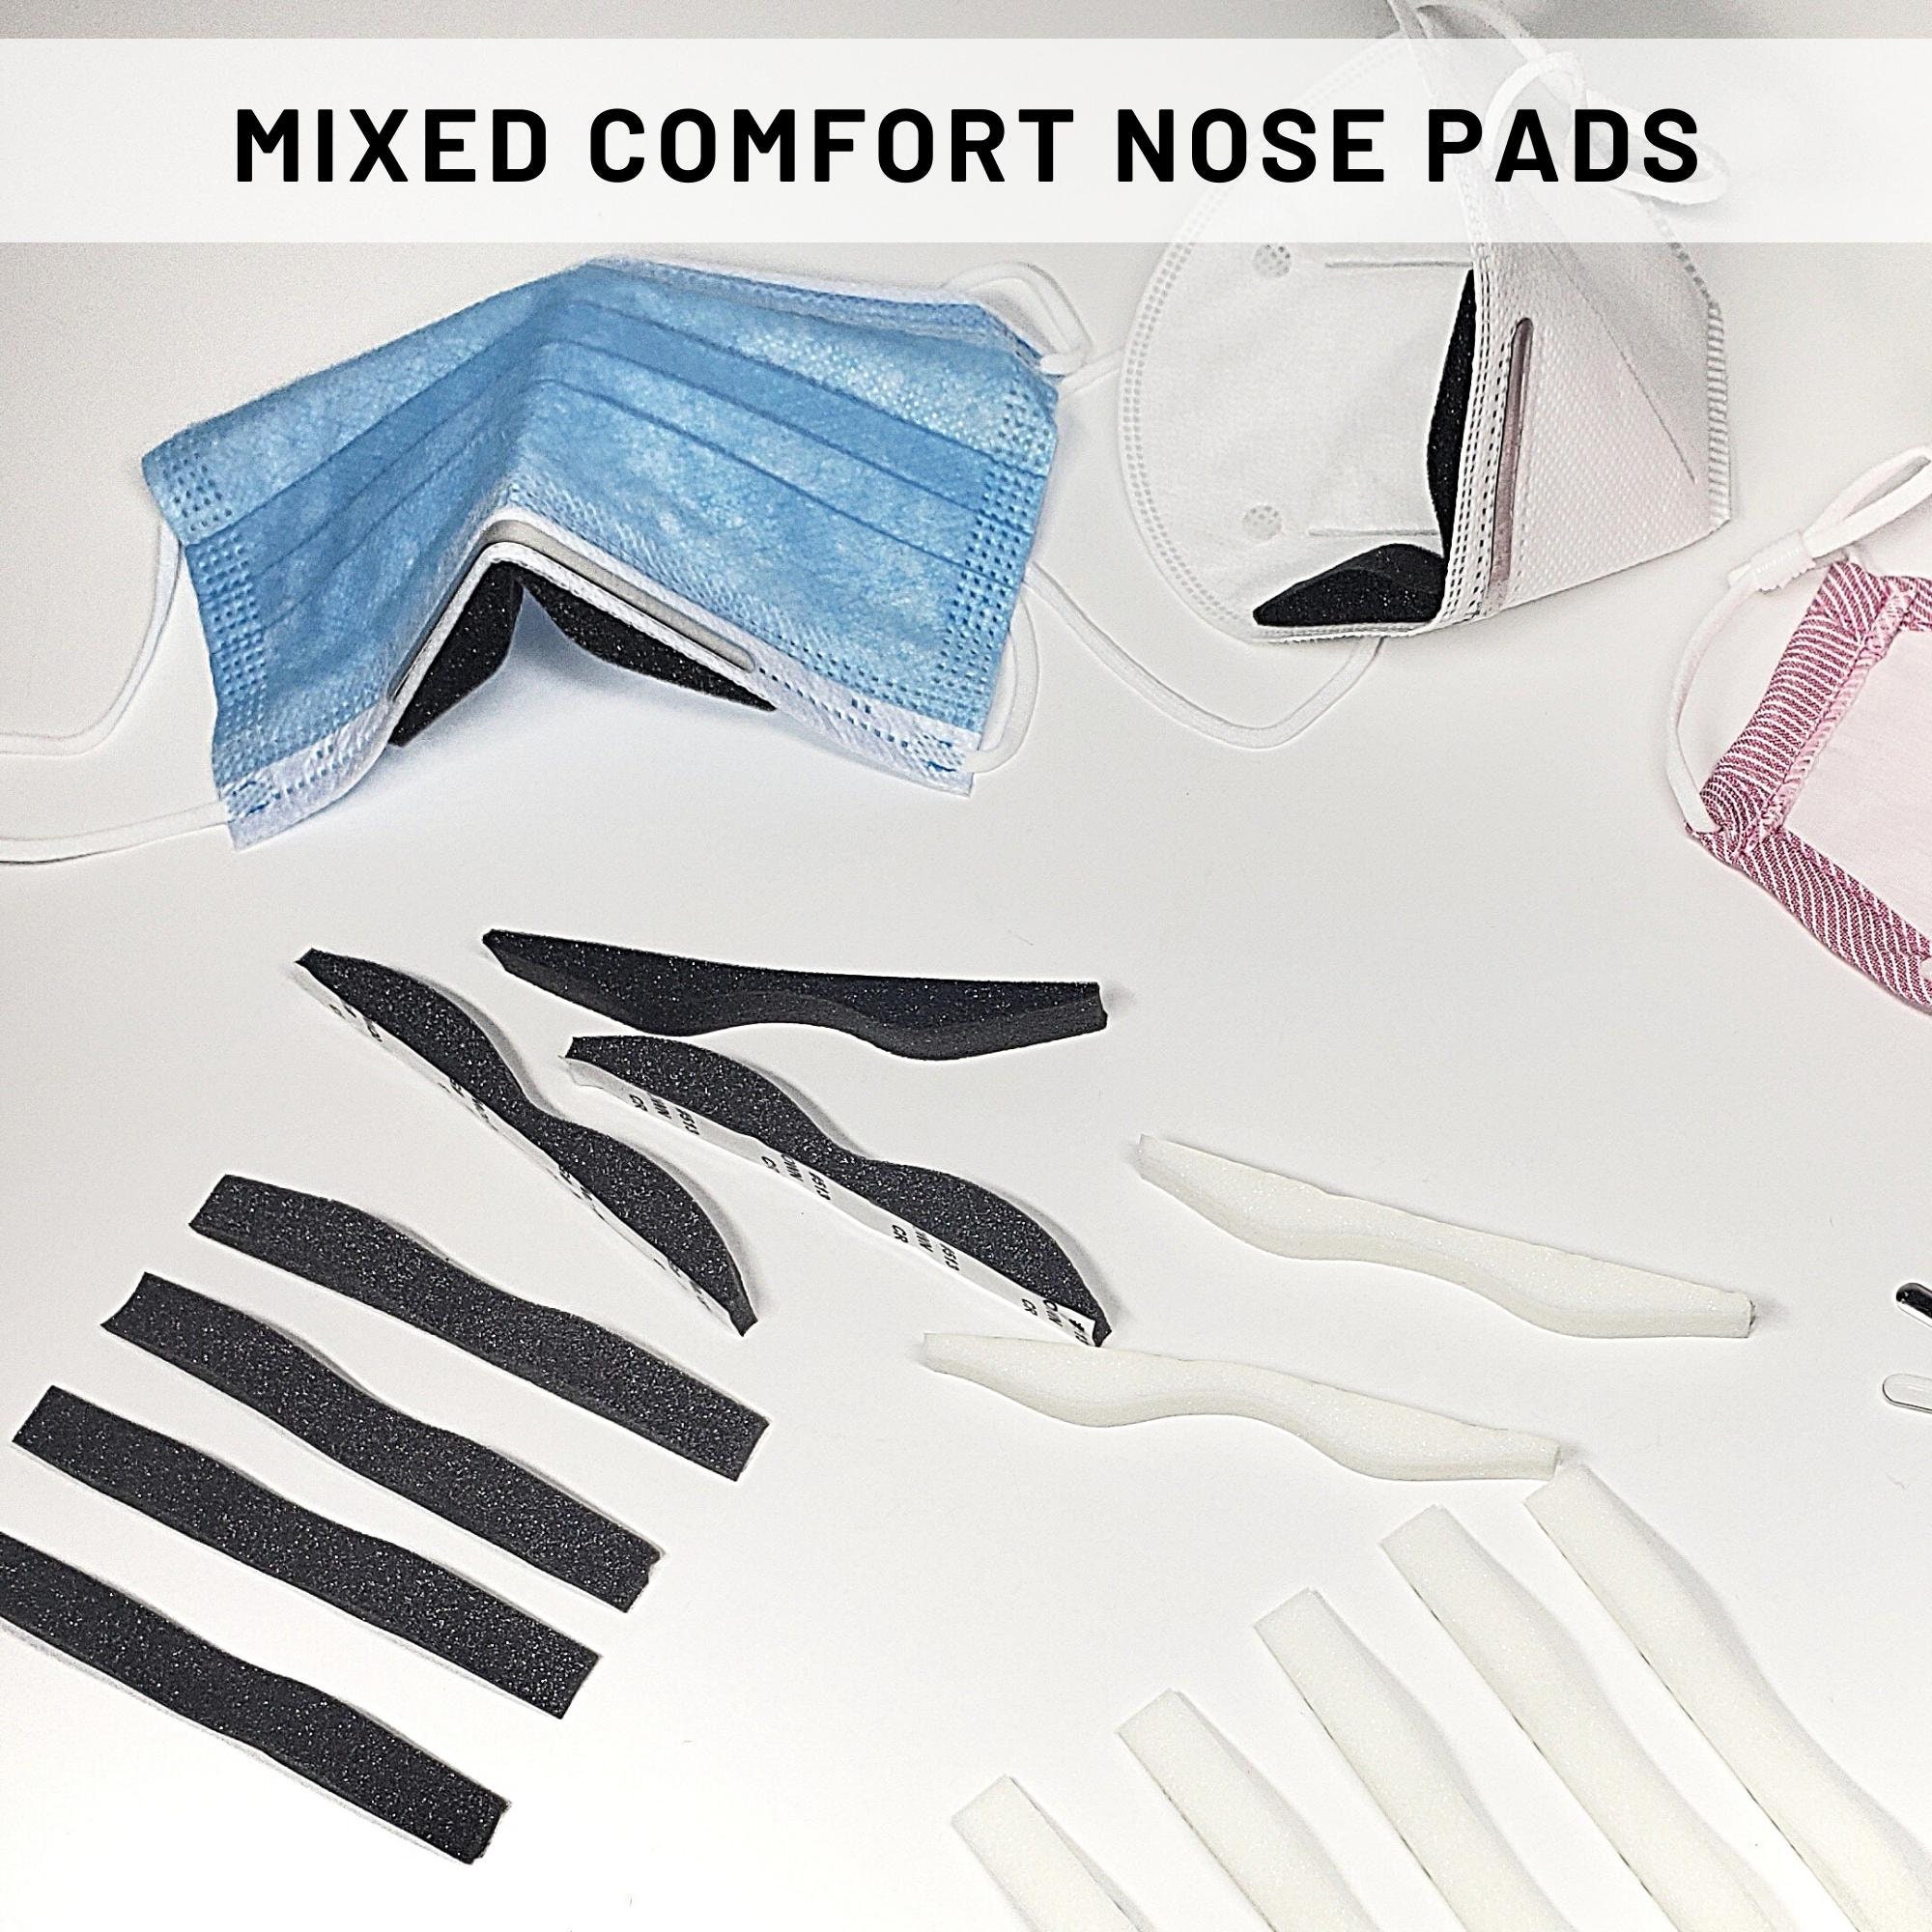 Anti Fog Nose Pads for Face Masks Self Adhesive Foam Strip for a No Fog  Mask and Comfort for Your Nose Face Mask Nose Pads Mask Nose Strip 